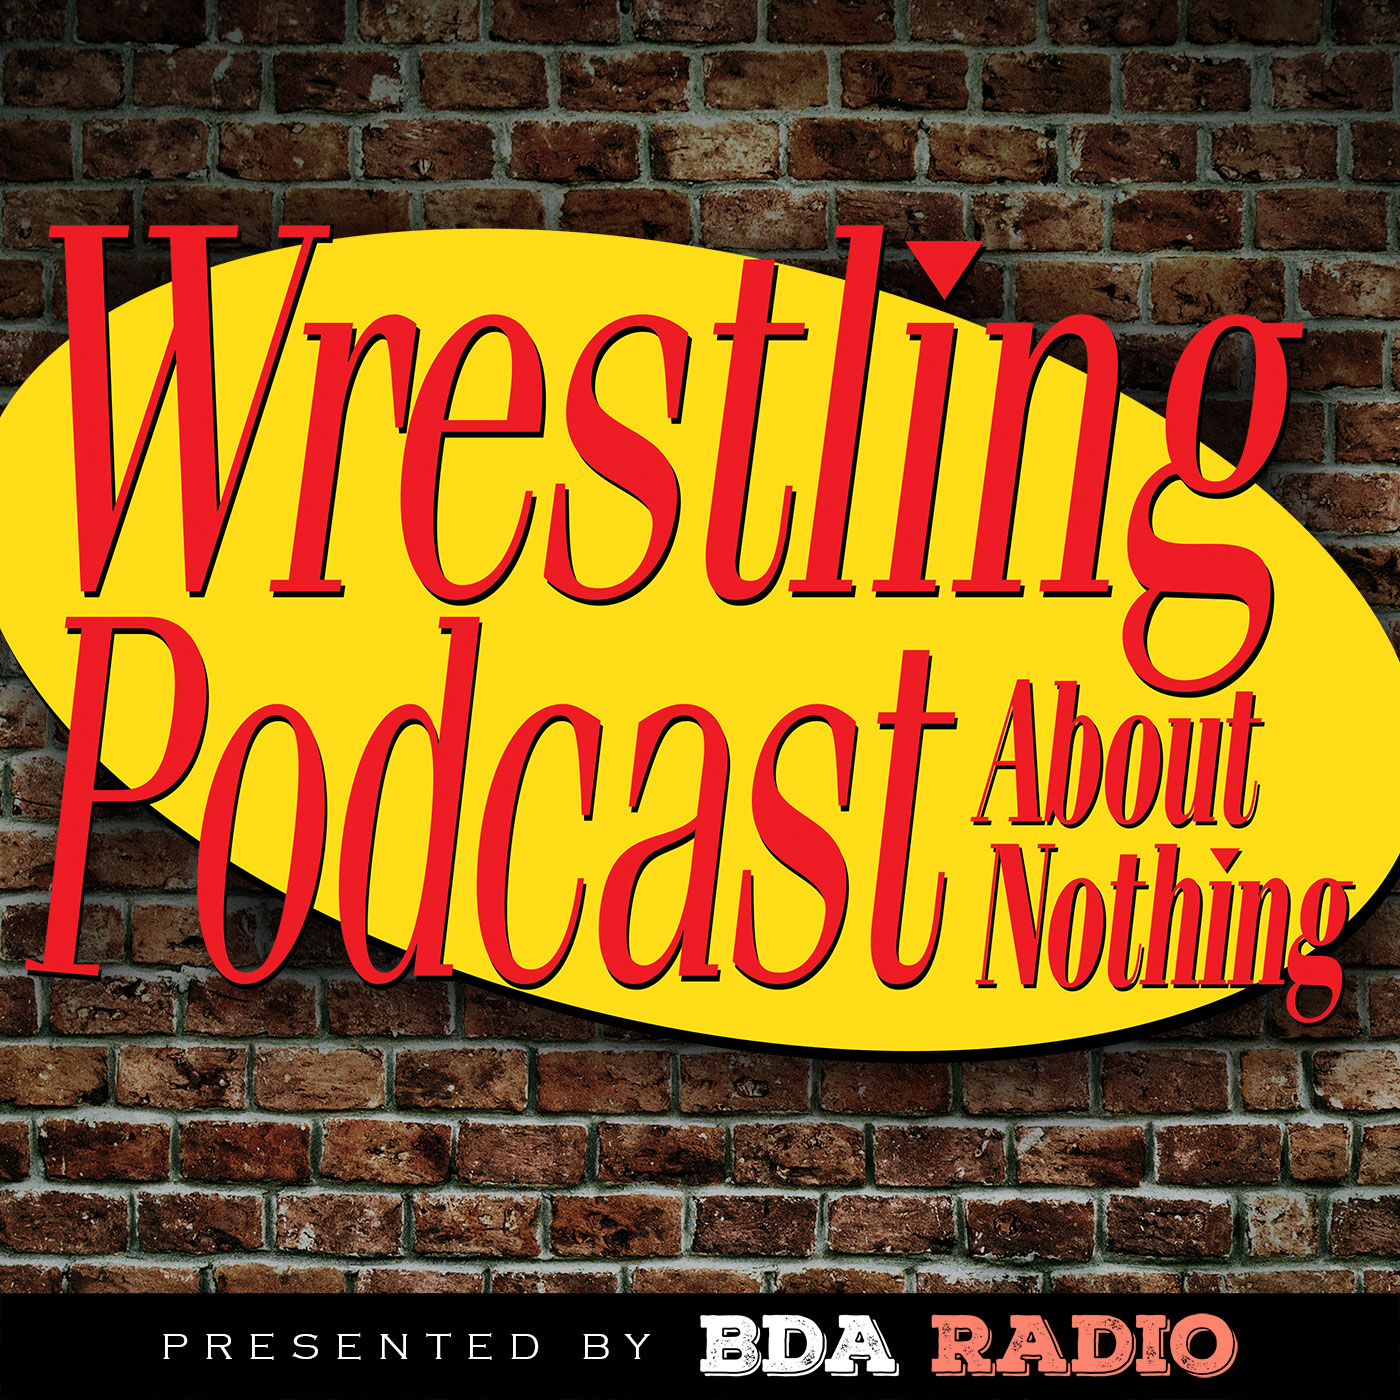 The Interview with Matt ”Tarzan Taylor” Spectro - Wrestling Podcast About Nothing - Episode 004